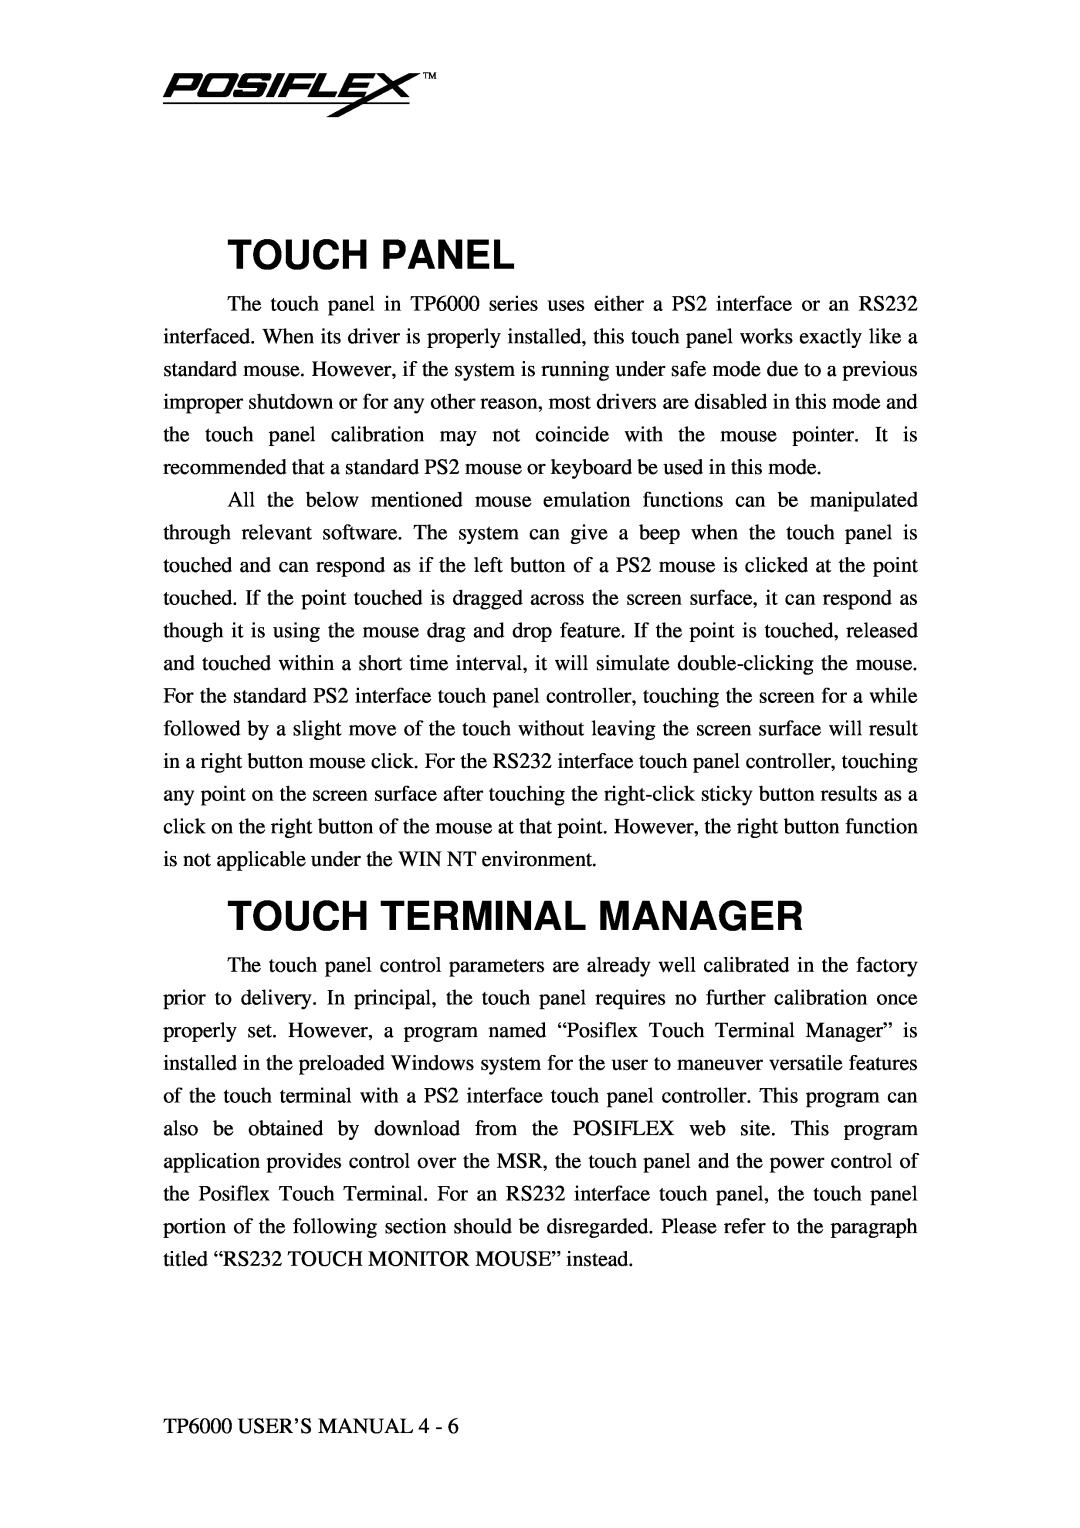 Mustek TP-6000 user manual Touch Panel, Touch Terminal Manager 